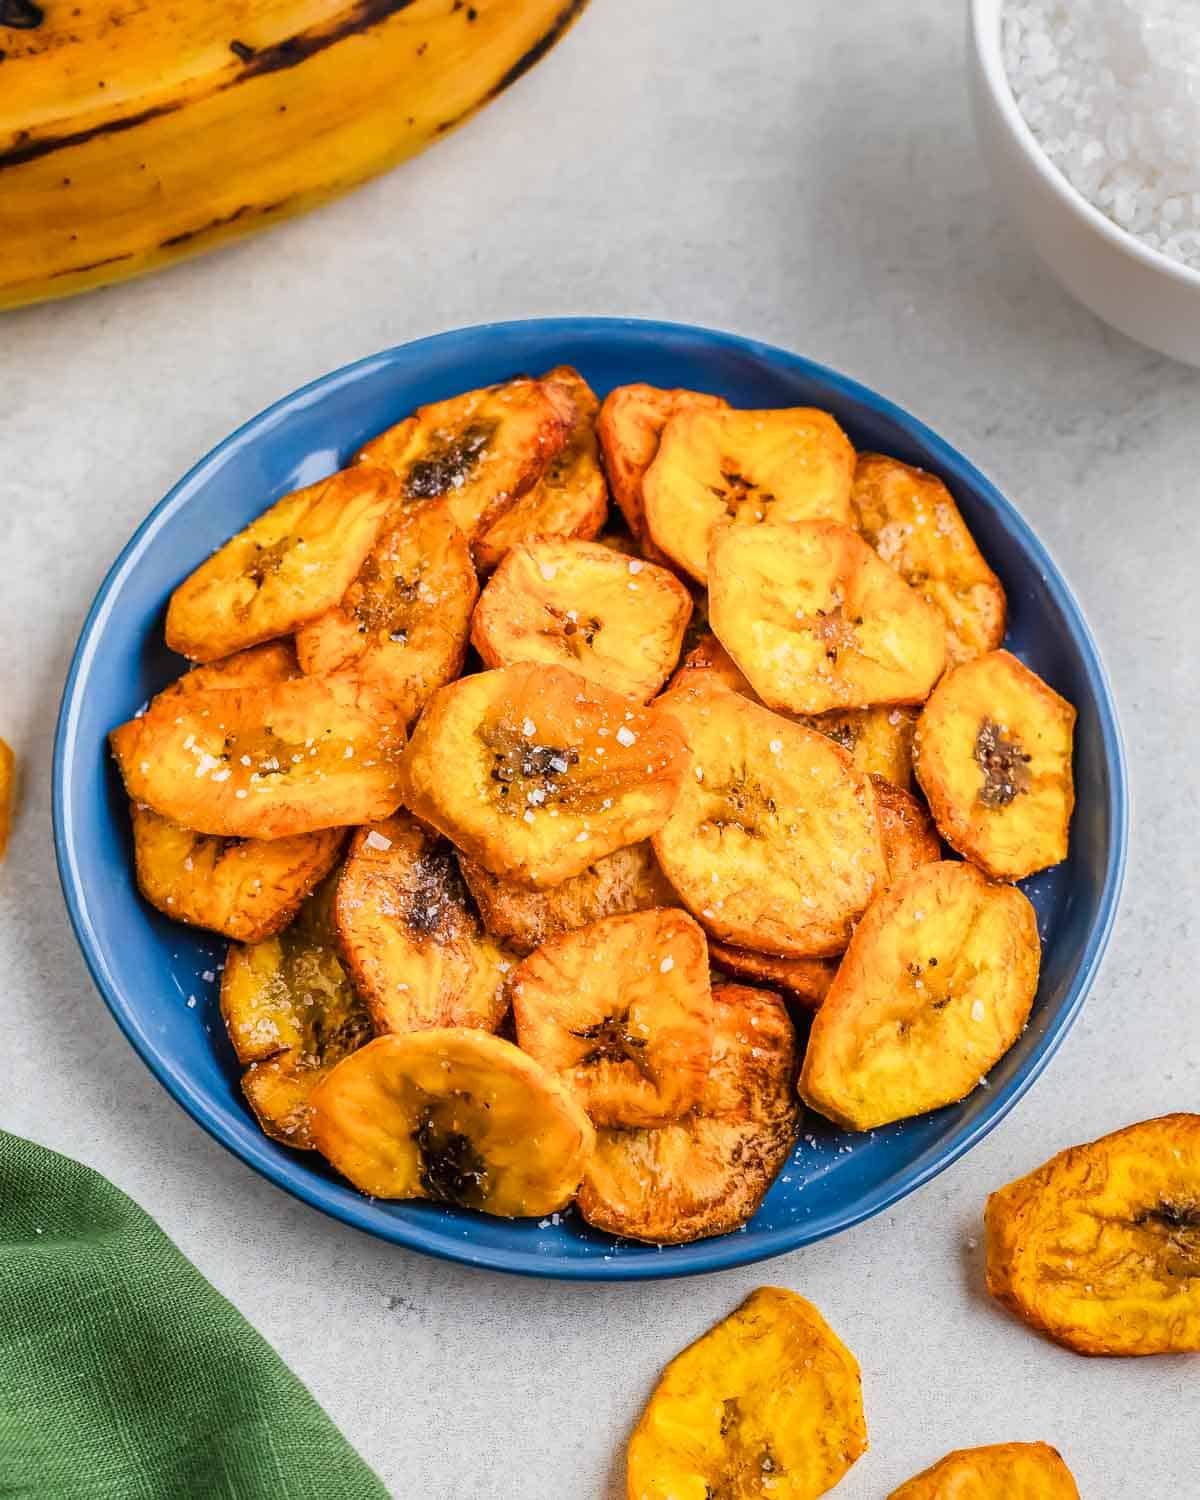 Fried plantain slices in a blue bowl, served on a light background.